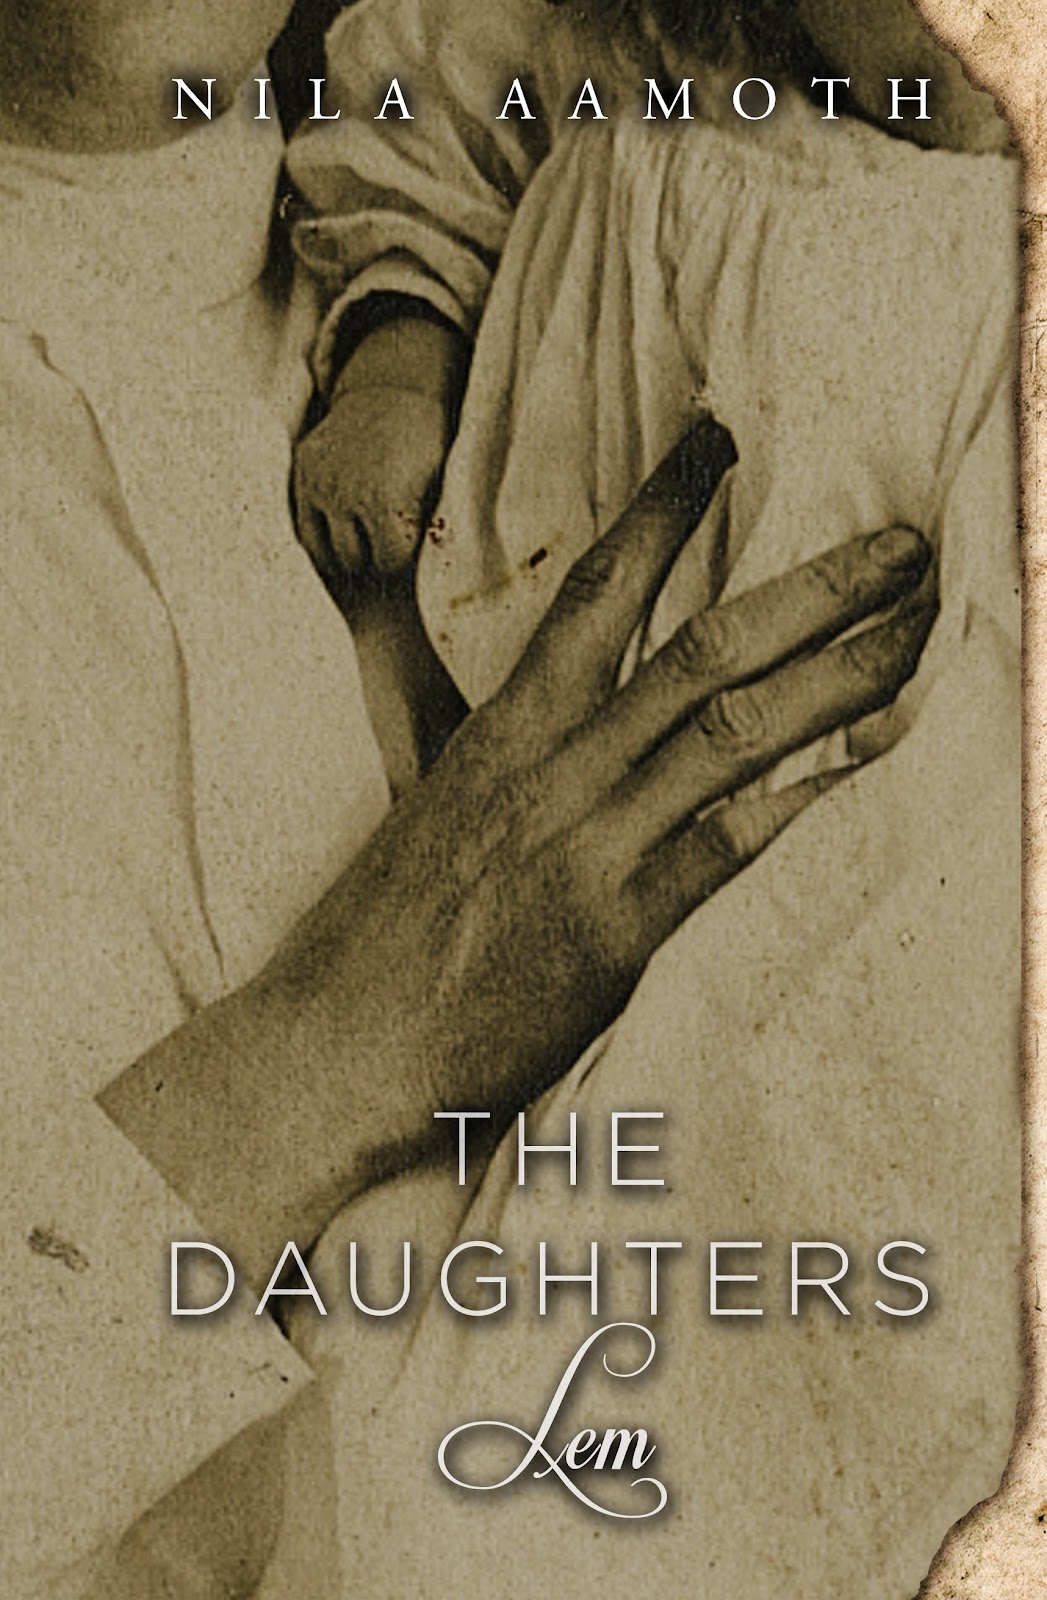 BooksChatter: ☀ The Daughters Lem - Nila Aamoth